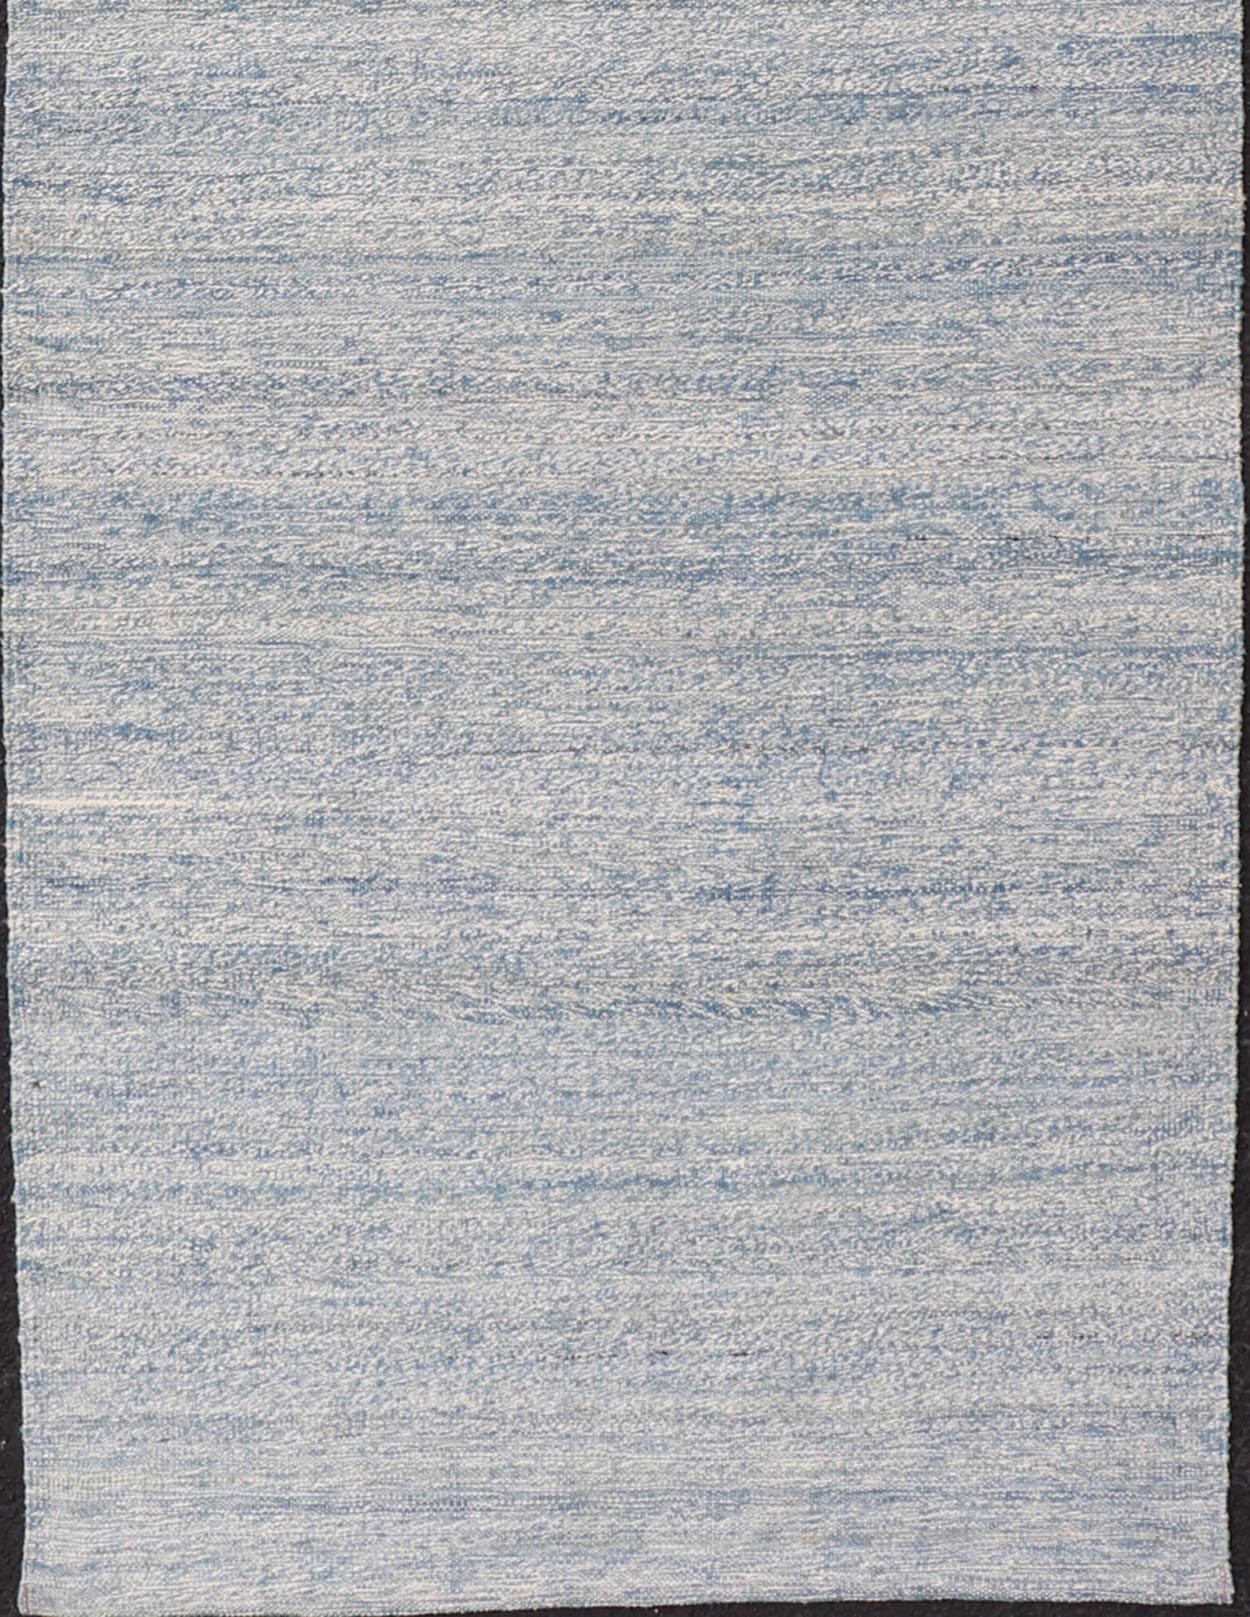 Flat-weave Kilim rug with all-over in shades of cream and blue,  Keivan Woven Arts/rug/ AFG-31760, country of origin / type: Afghanistan / Kilim

Measures: 3'1 x 9'7

This minimalist piece evokes casual and easy vibes. Perfect for modern interior